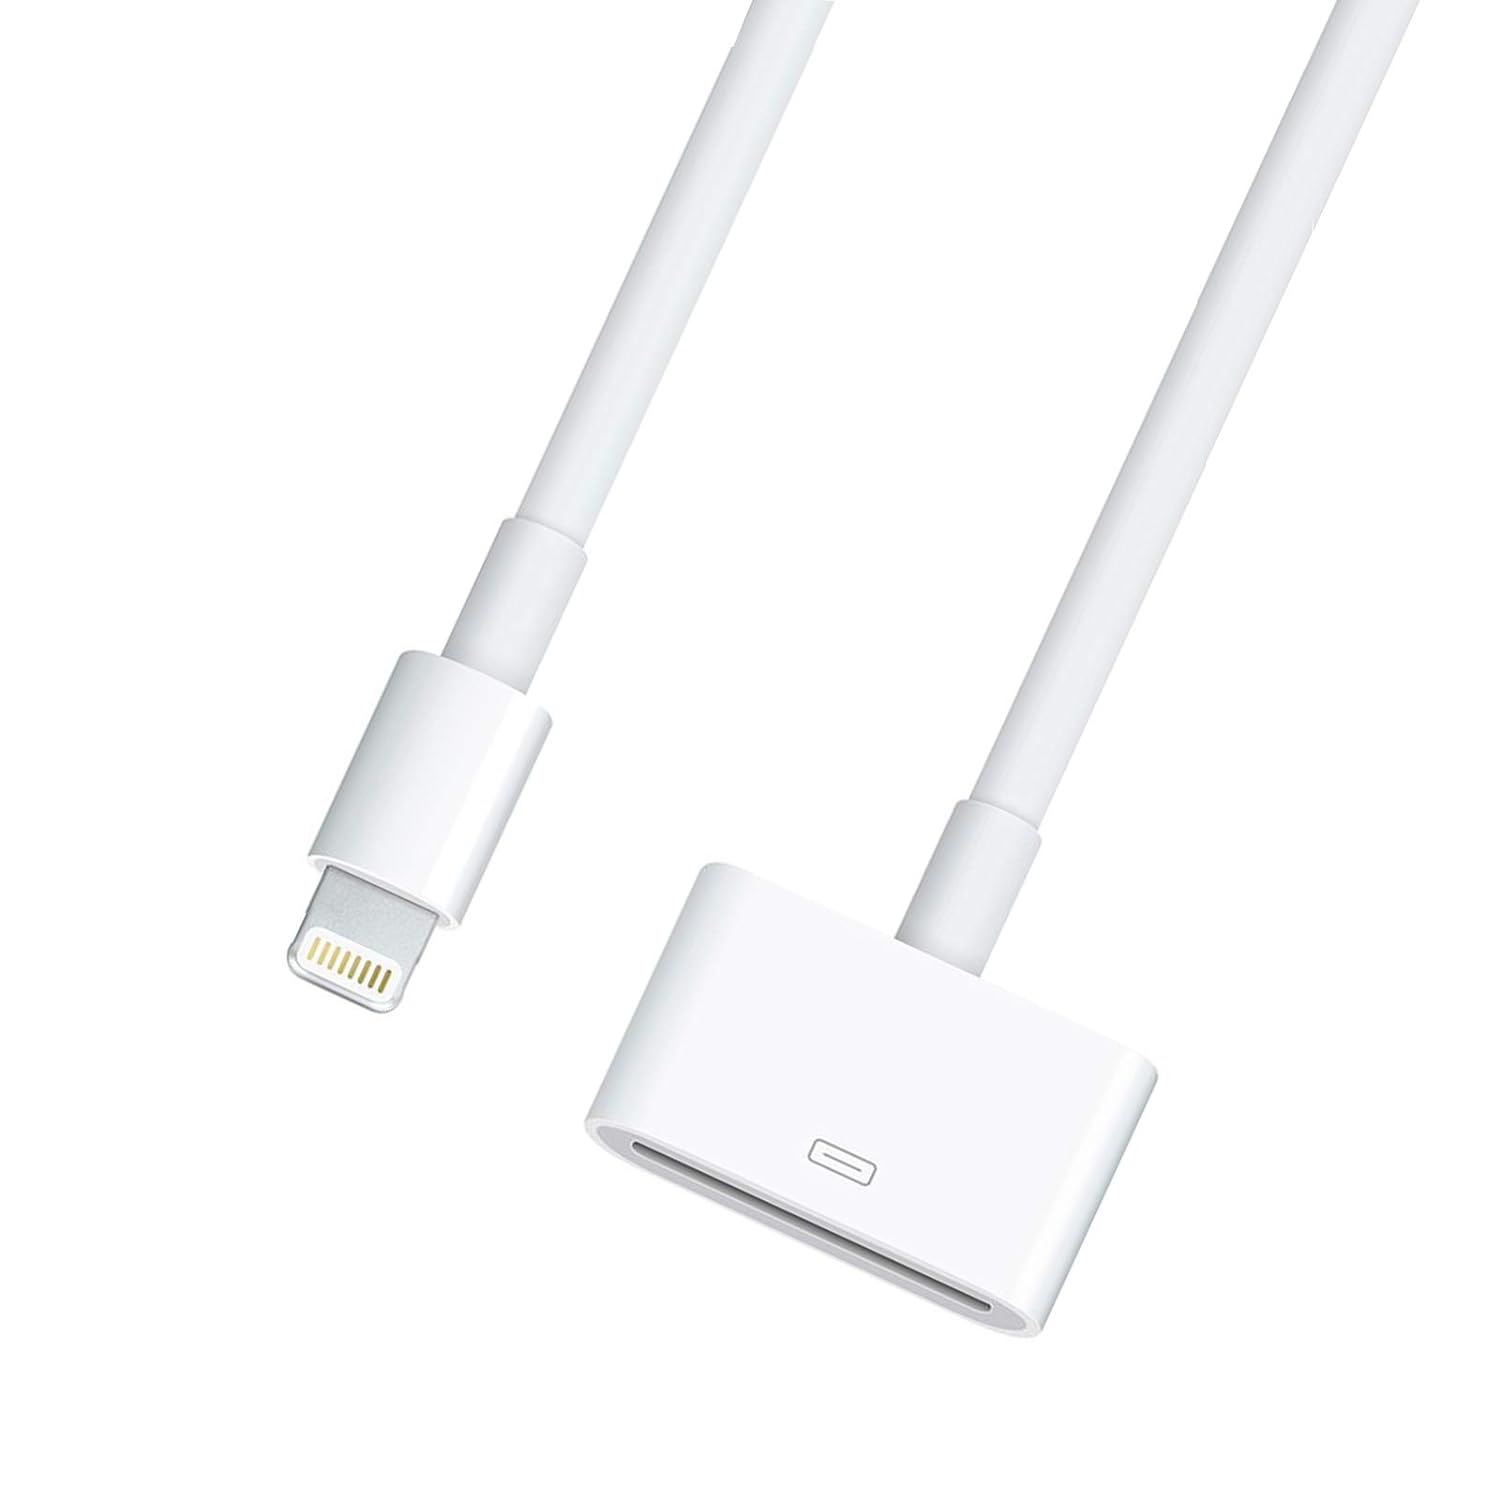 Lightning to 30 Pin Cable Charging Sync Connector 8 Pin Male to 30 Pin Female Converter Adapter Compatible with Select iPhone, iPad and iPod Models White